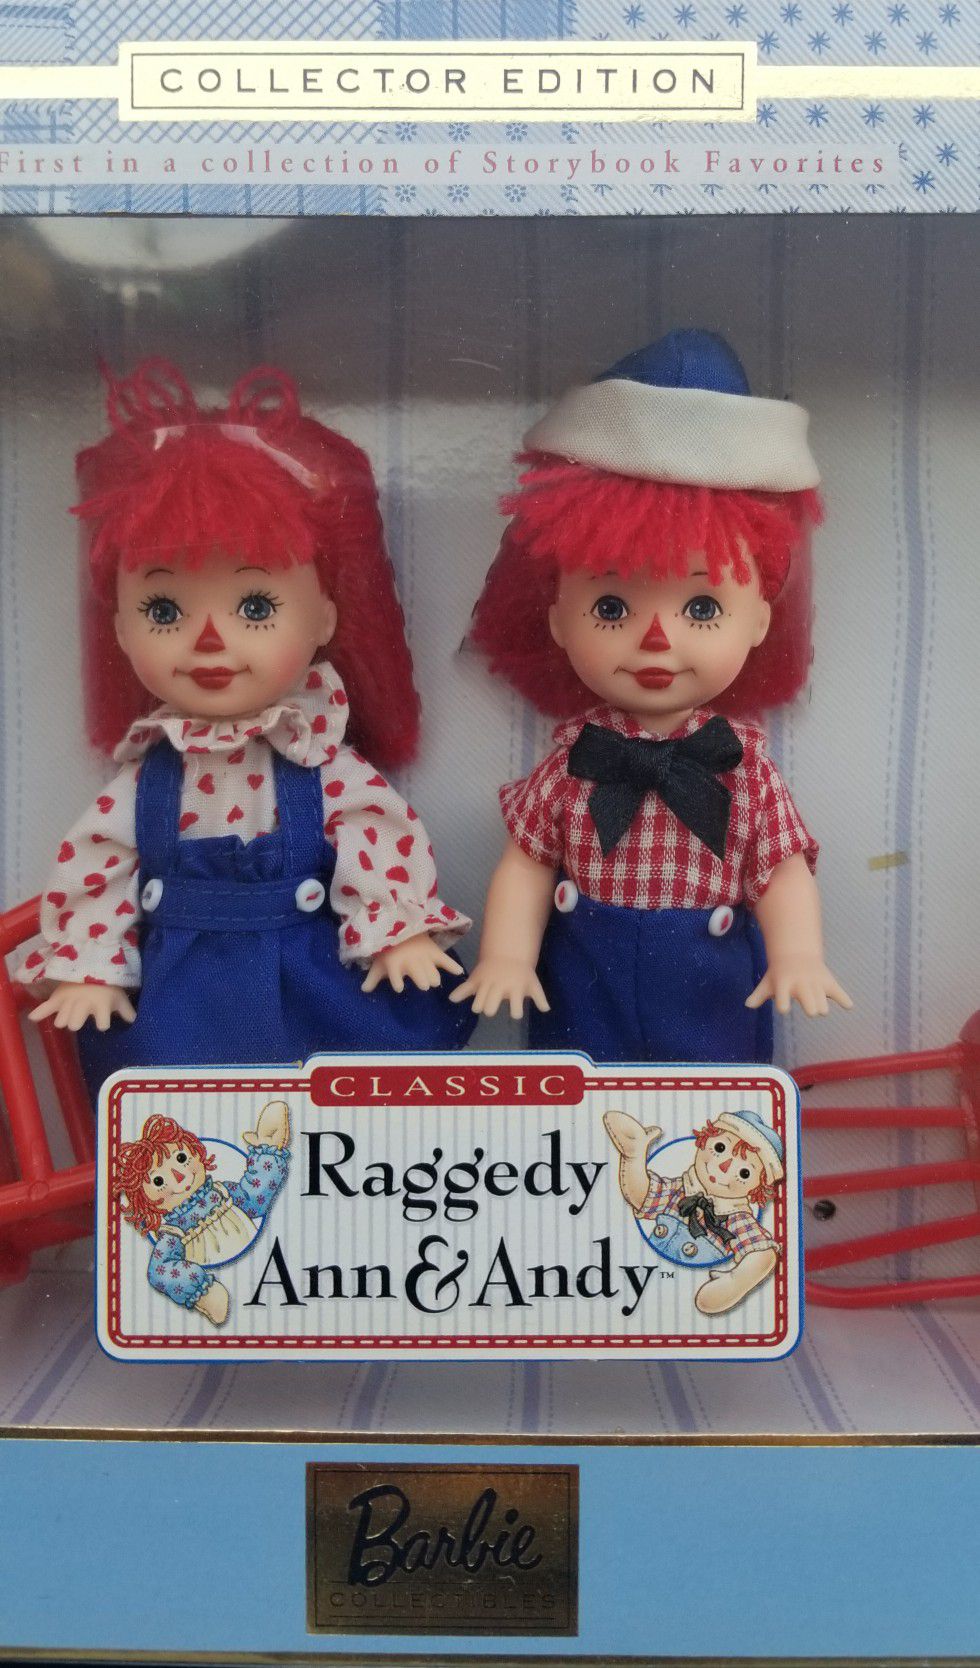 Raggedy Ann & Andy classic Tommy & Kelly Barbie Collector Edition